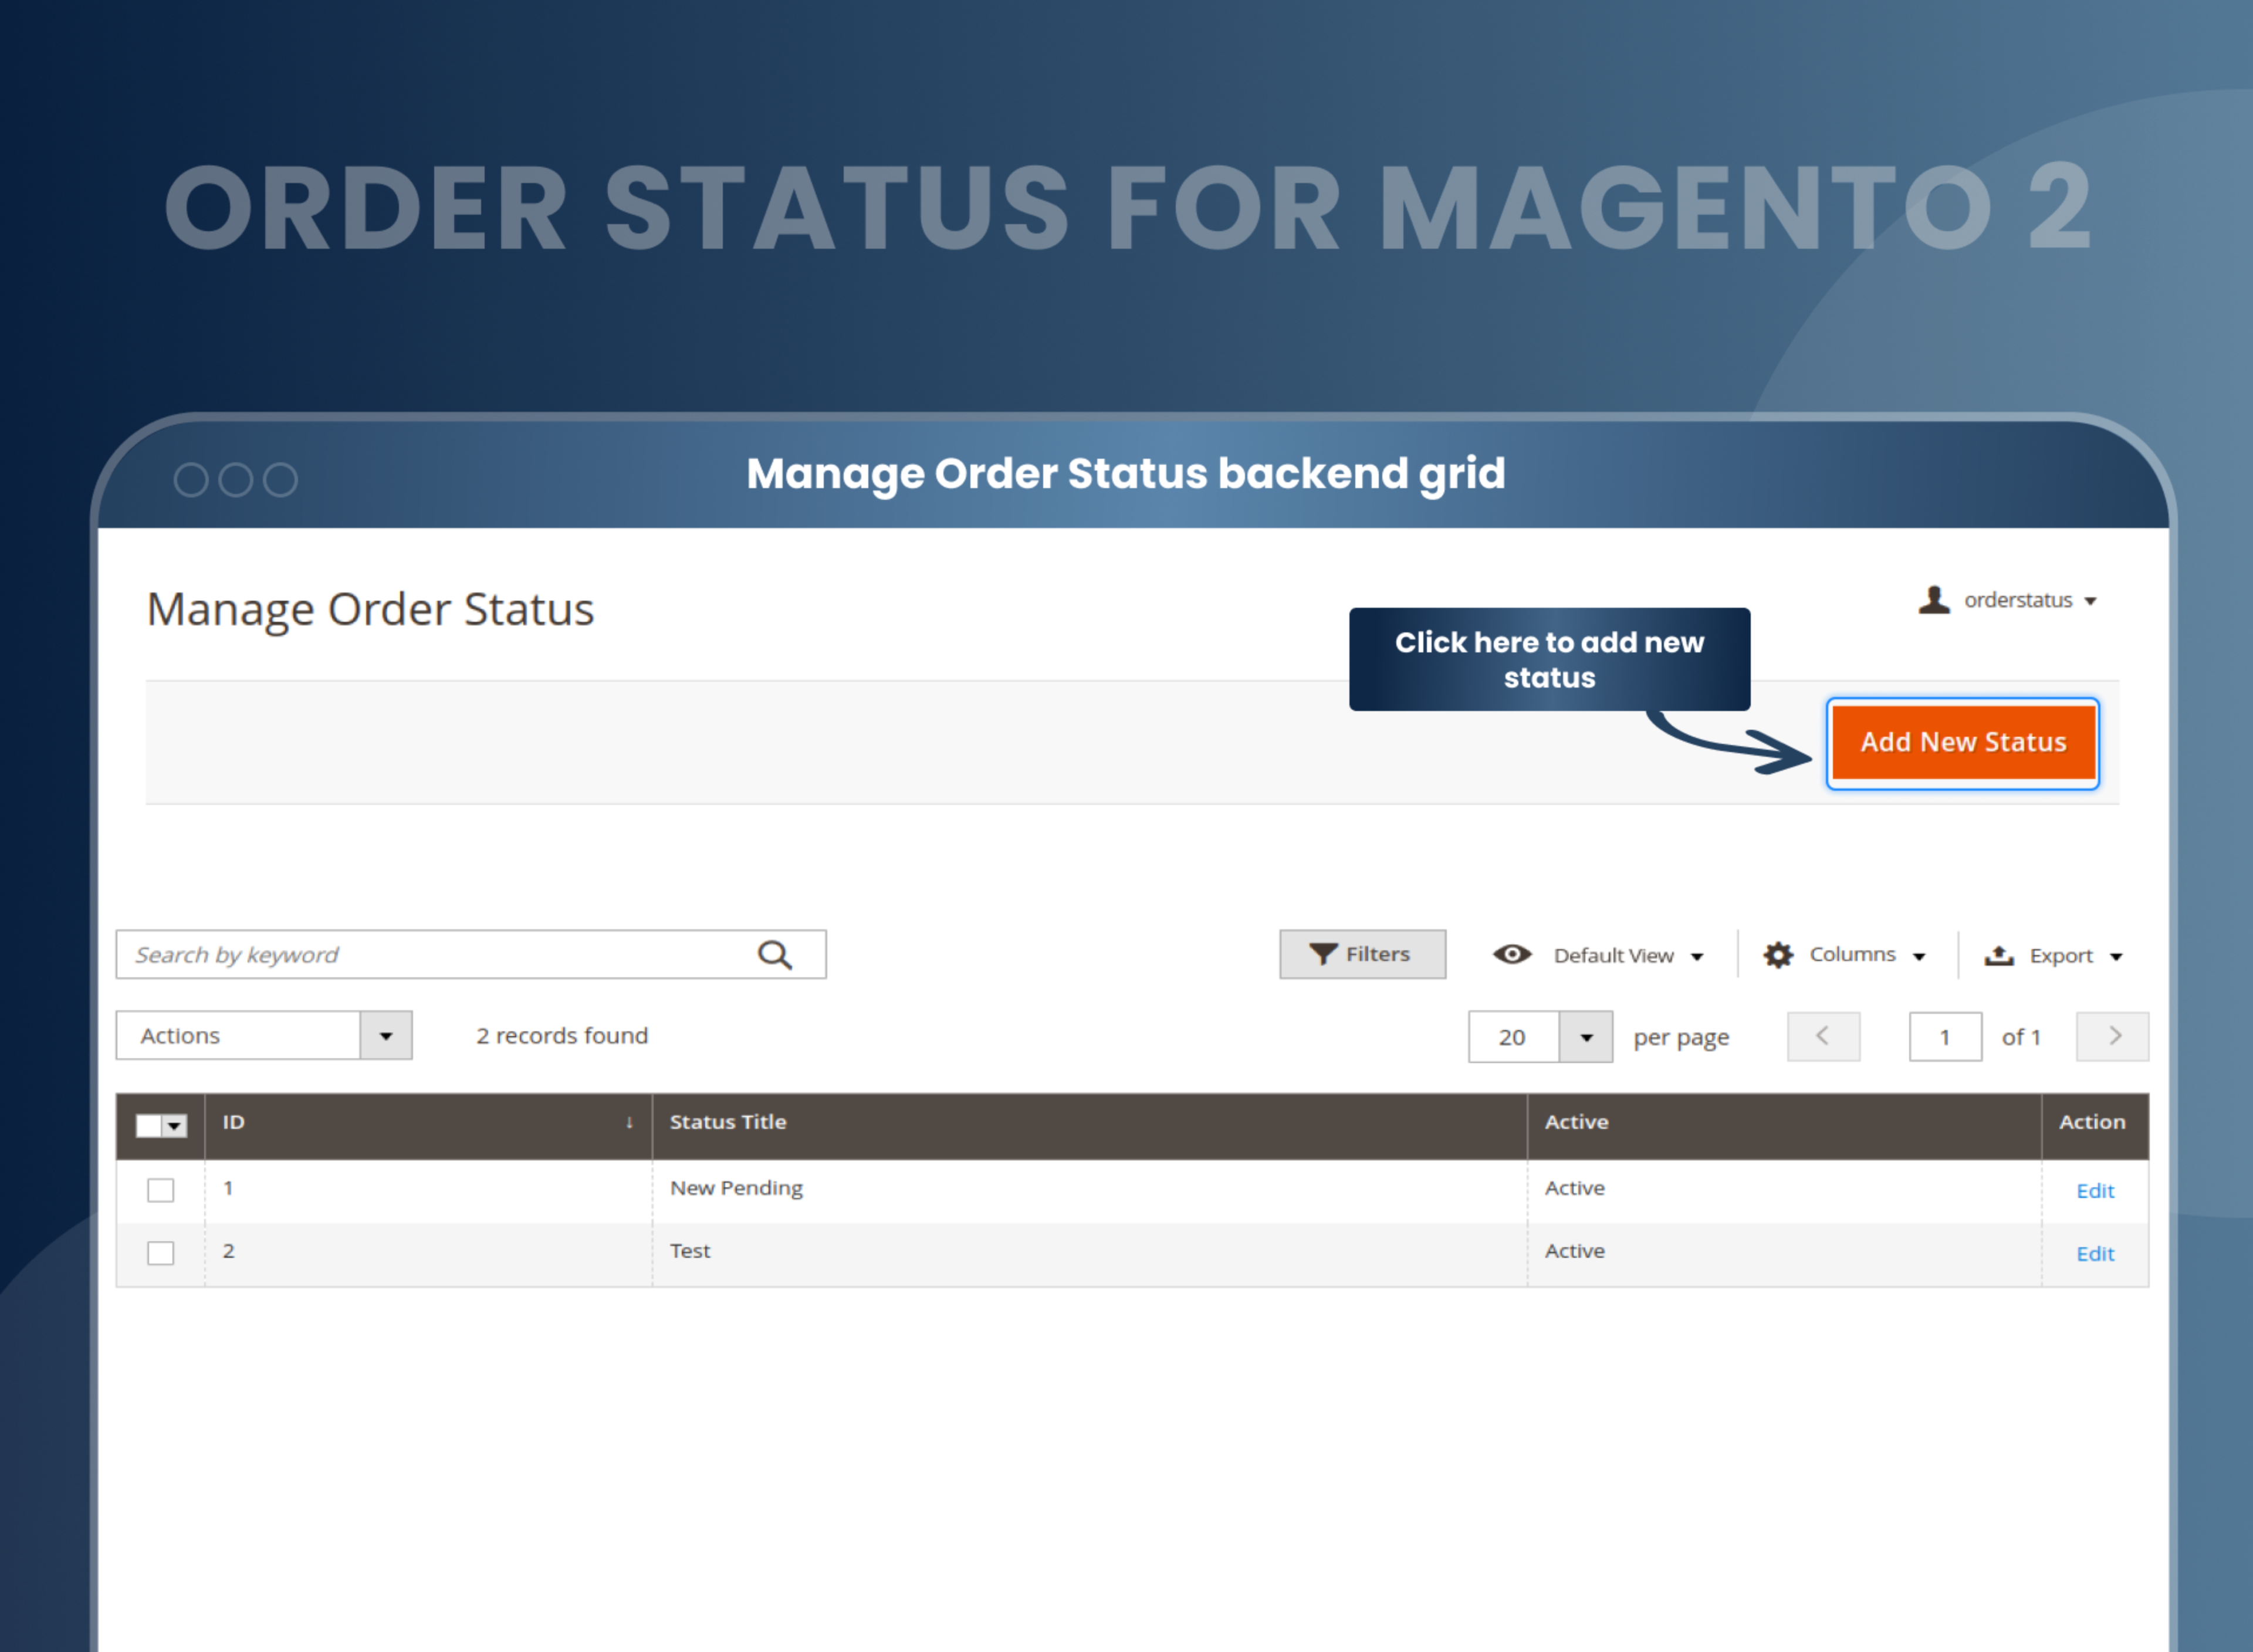  Manage Order Status backend grid